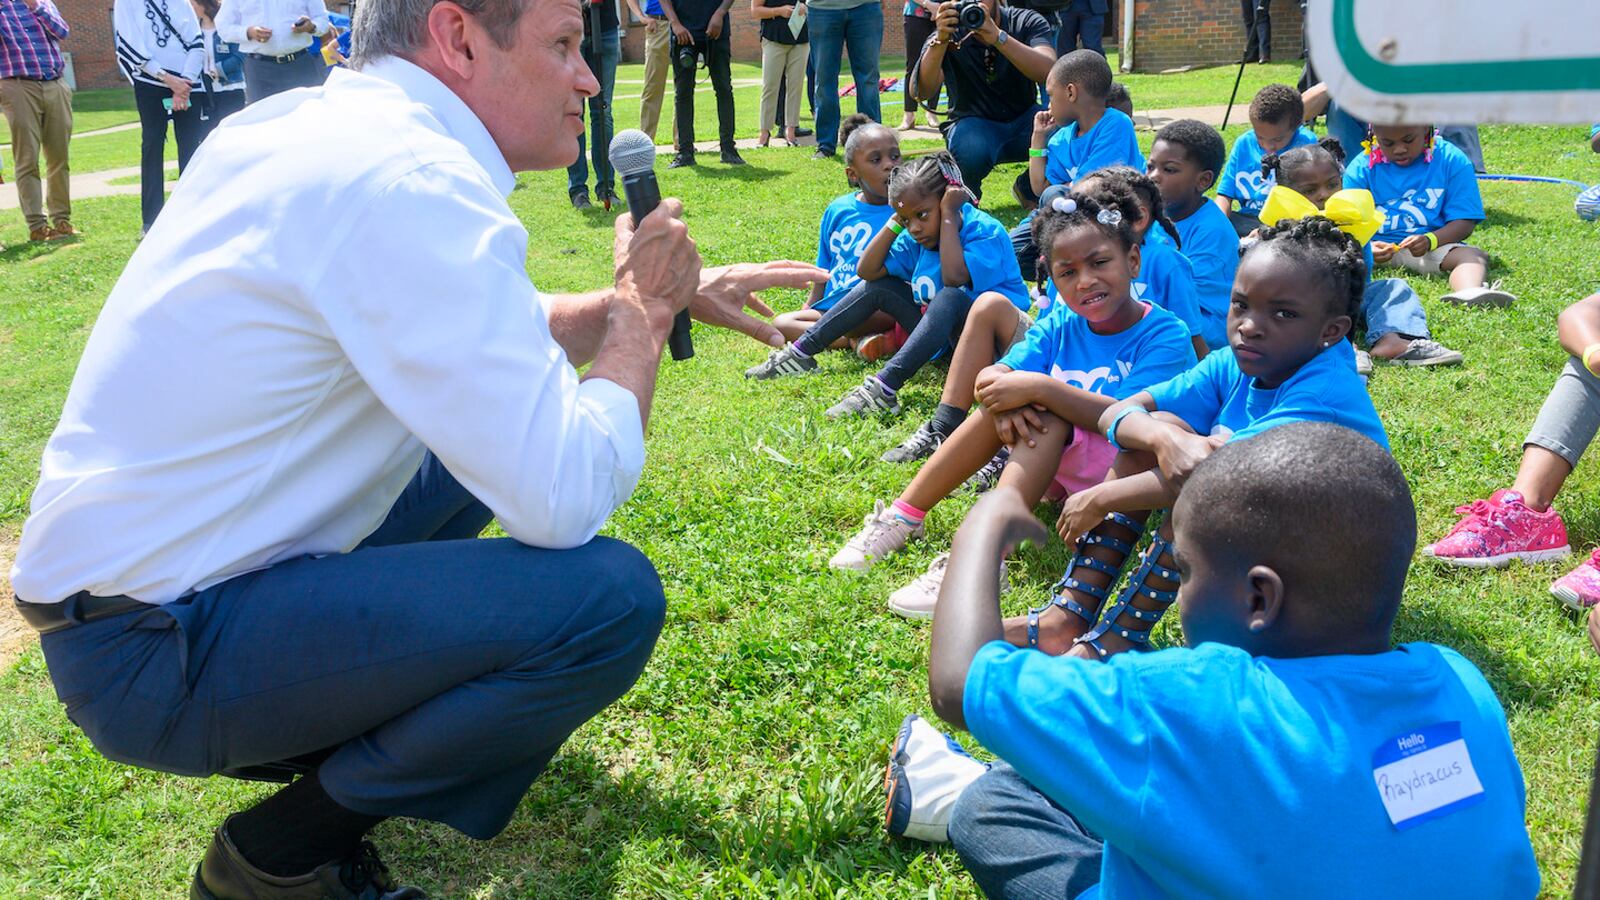 Gov. Bill Lee visits a YMCA program in Memphis and speaks with children who could be eligible for his education savings account program. Lee wants the program to launch in time for the 2020-21 school year.